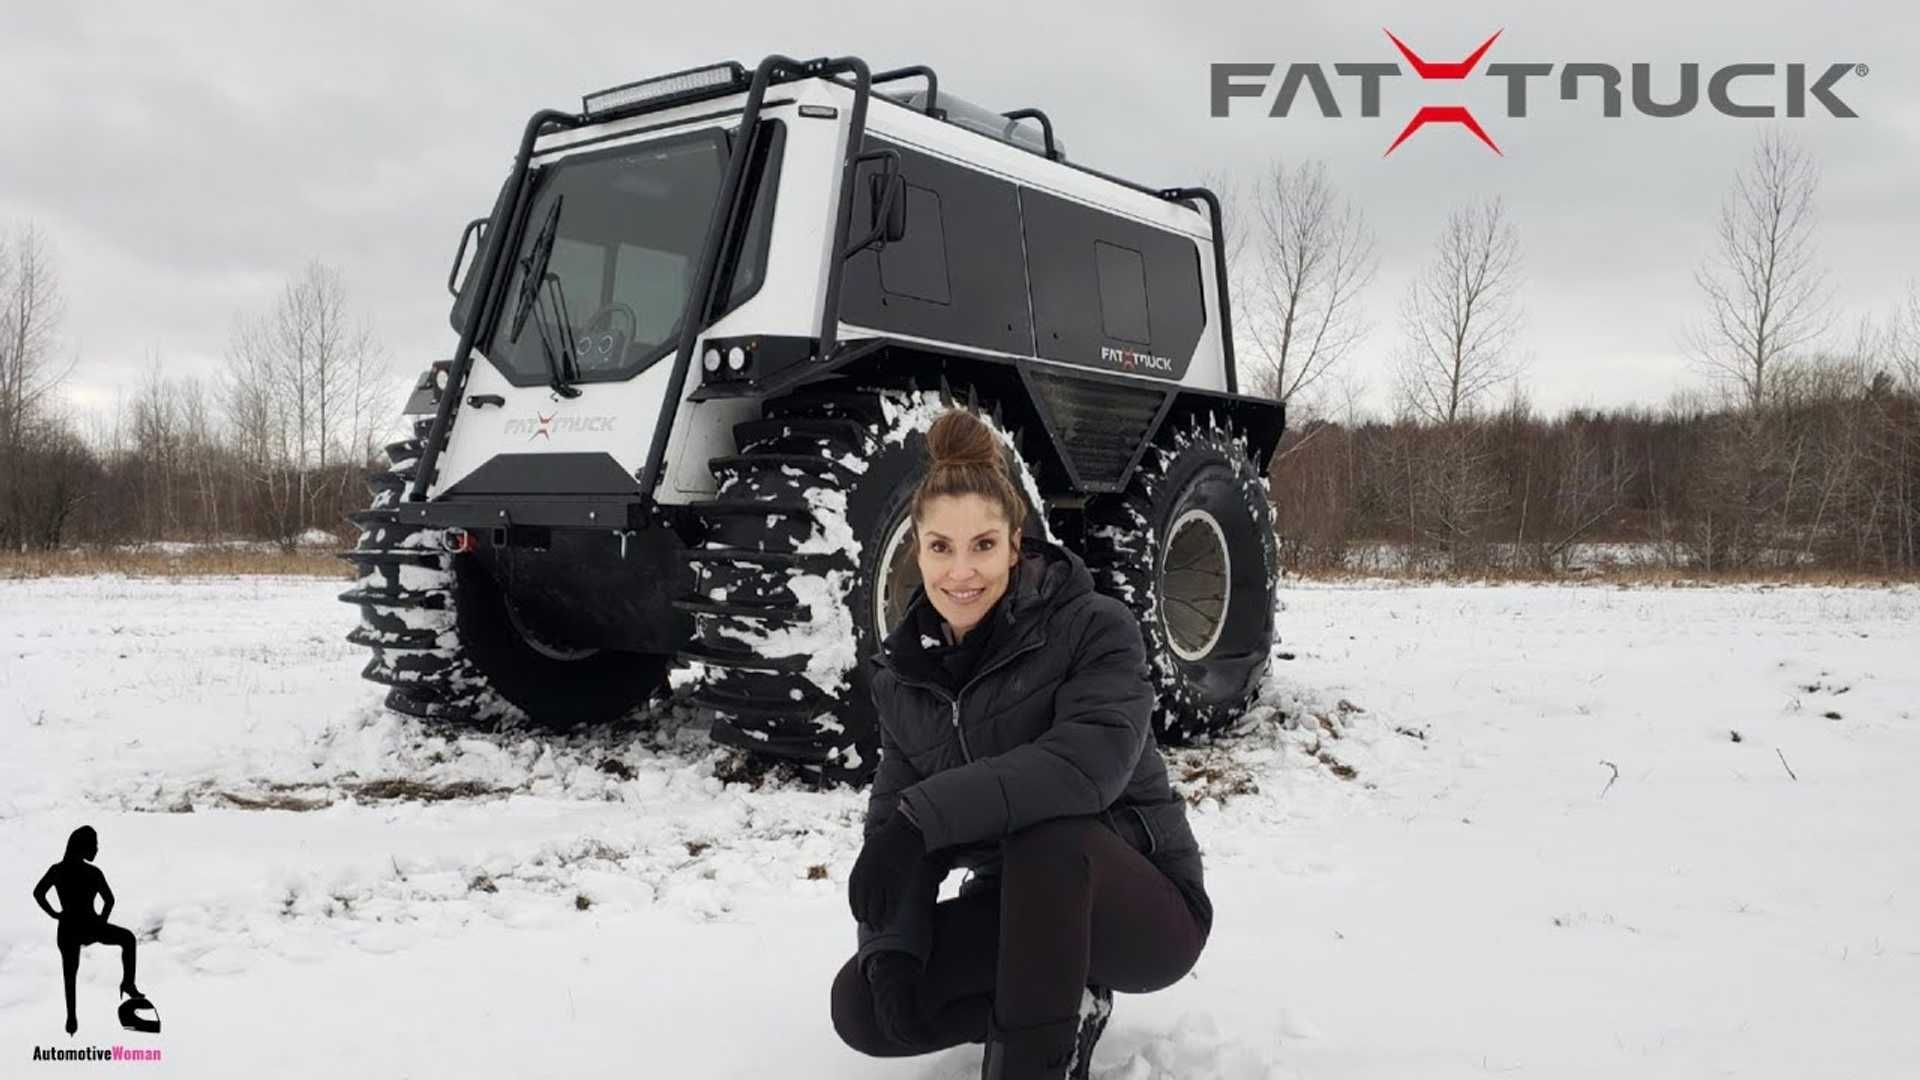 Meet the FAT truck, Canada's answer to the Russian Sherp